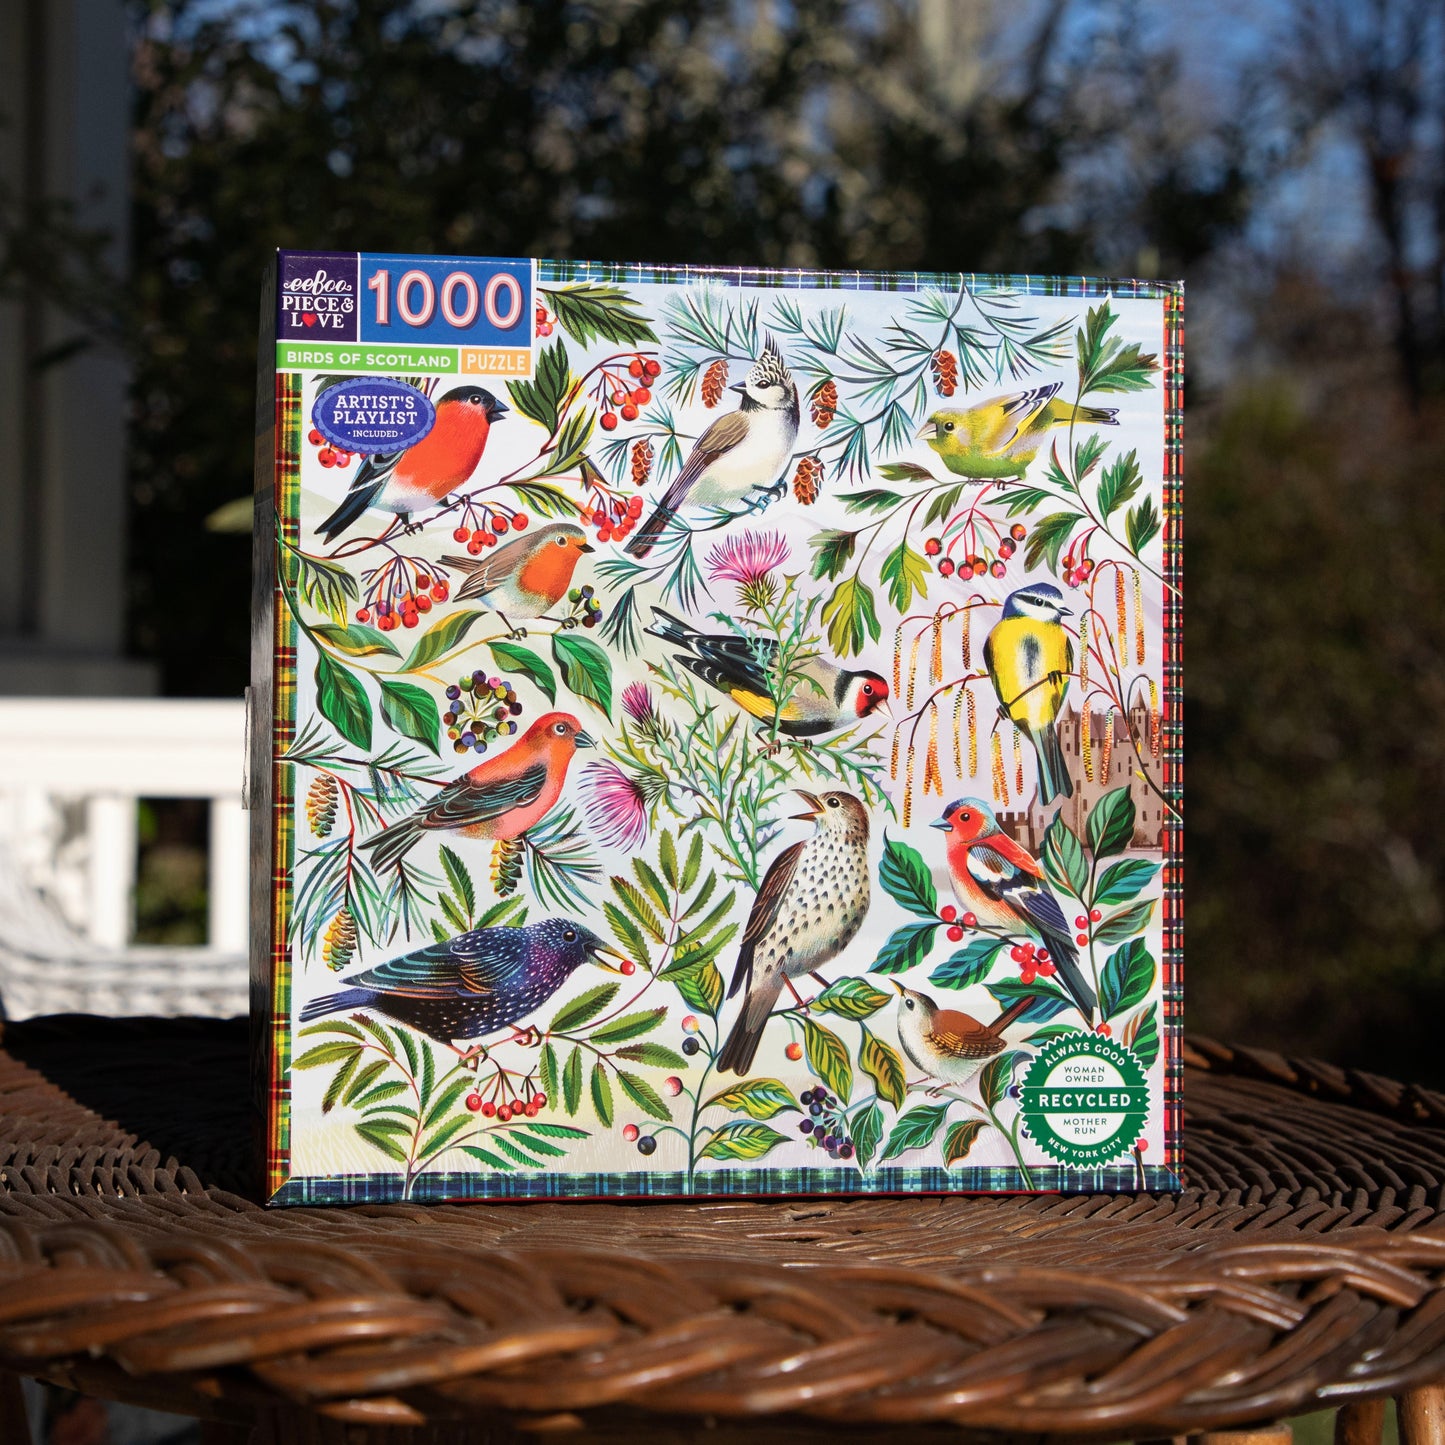 Birds of Scotland 1000 Piece Jigsaw Puzzle | Beautiful Unique Gifts for Adults | Sustainable Puzzles made with Recycled Materials